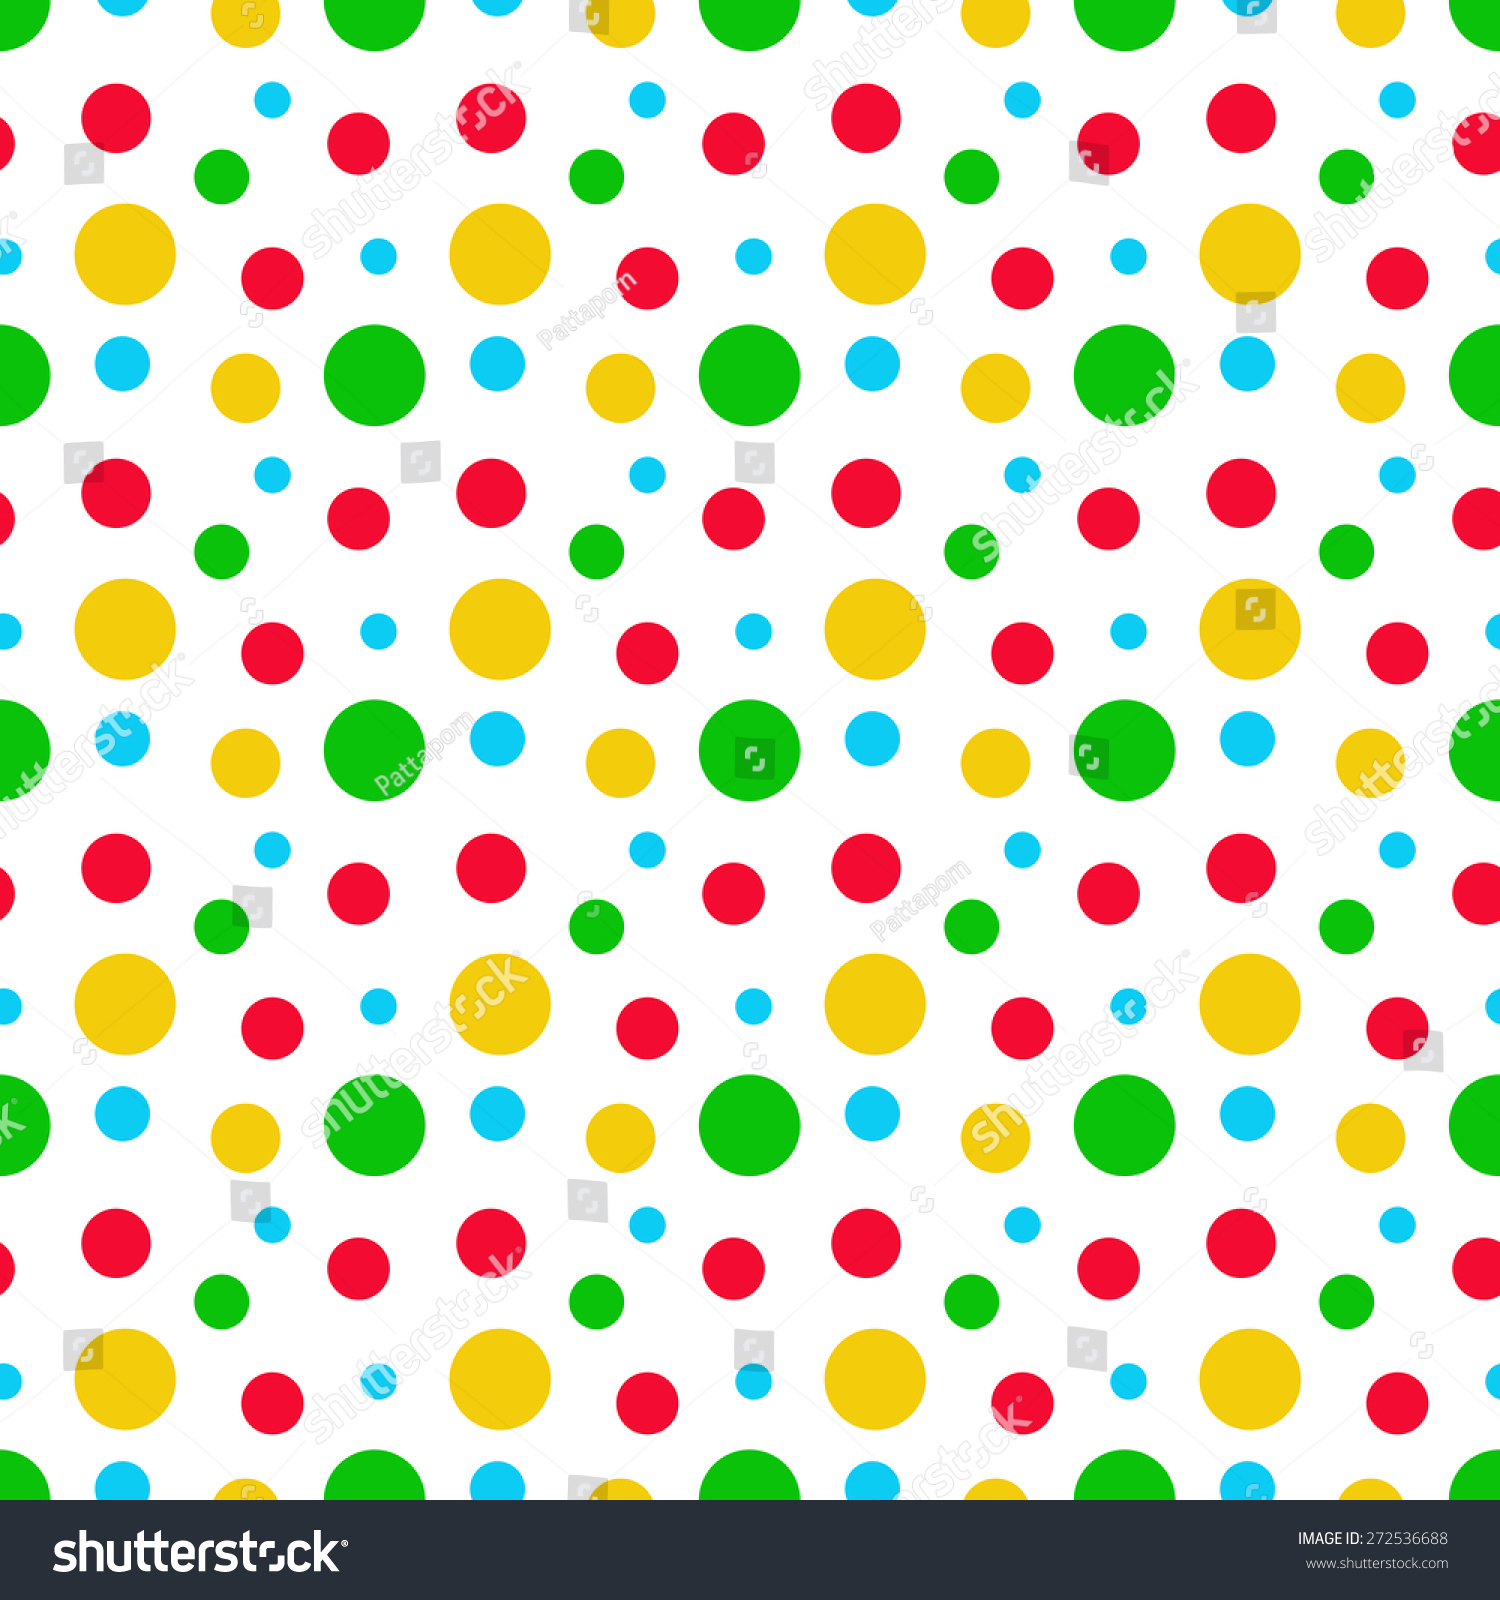 Green Blue Red Yellow Circles Pattern Stock Illustration 272536688